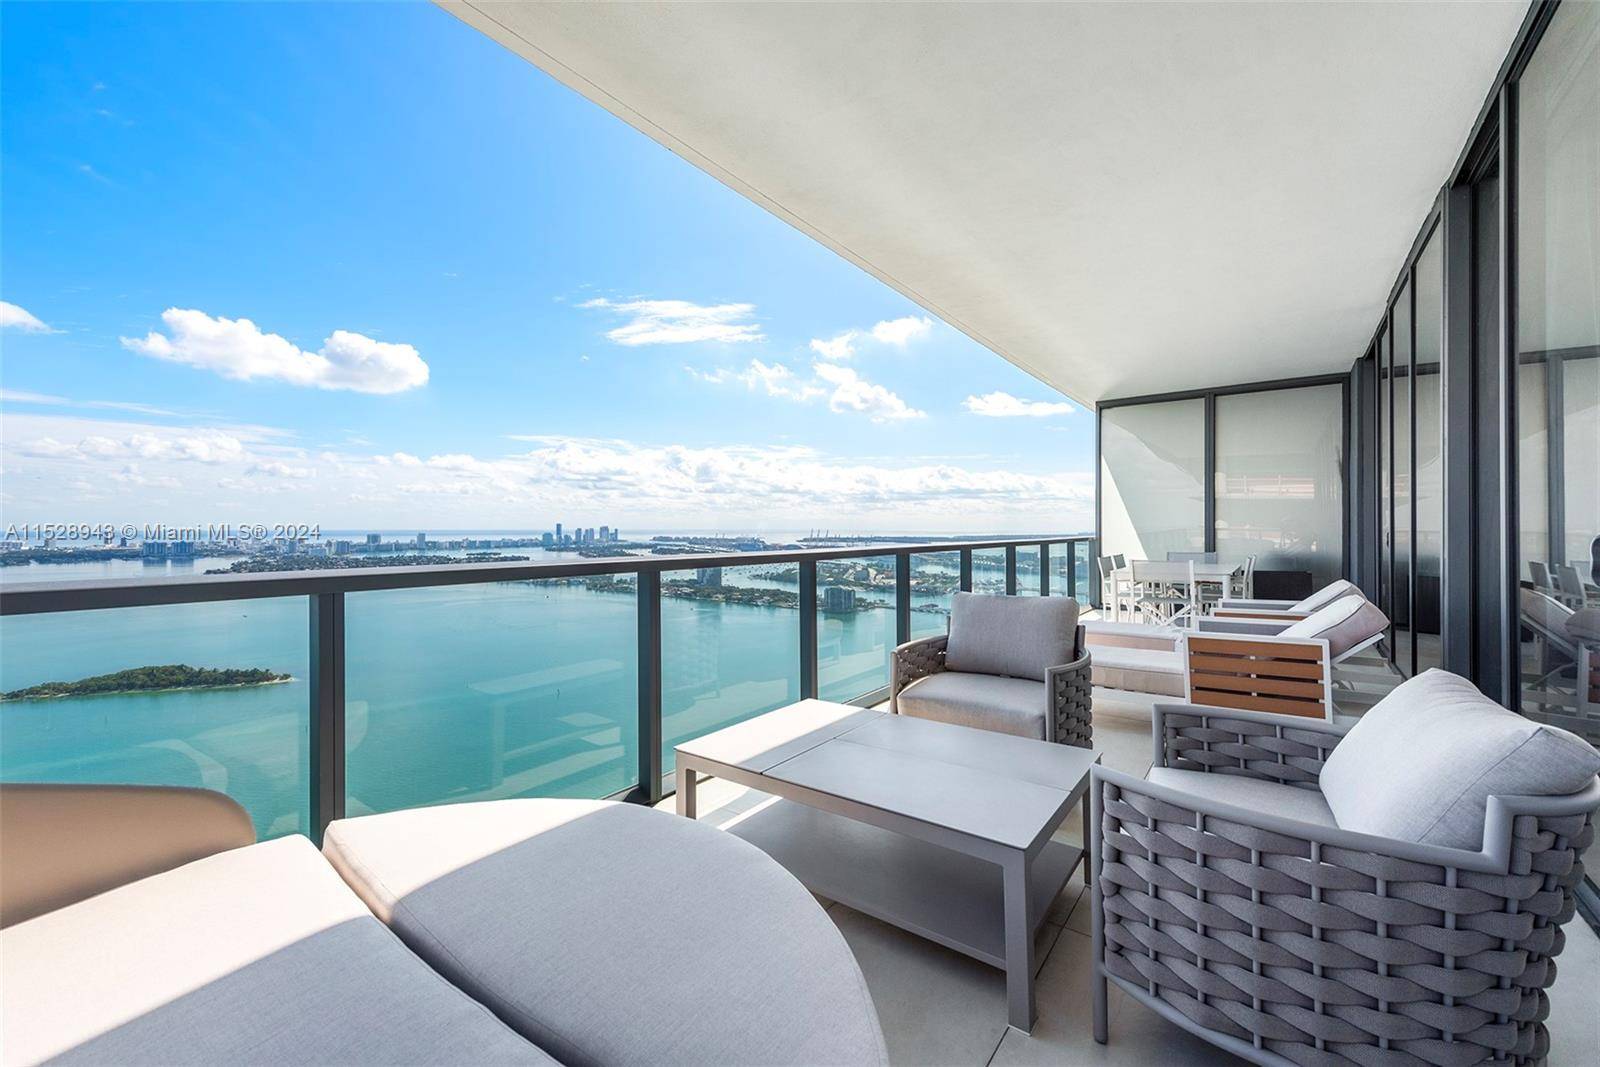 Exquisite waterfront residence at Elysee ideally situated along Biscayne Bay in the Edgewater Miami neighborhood offering sheer sophistication with a modern flair.